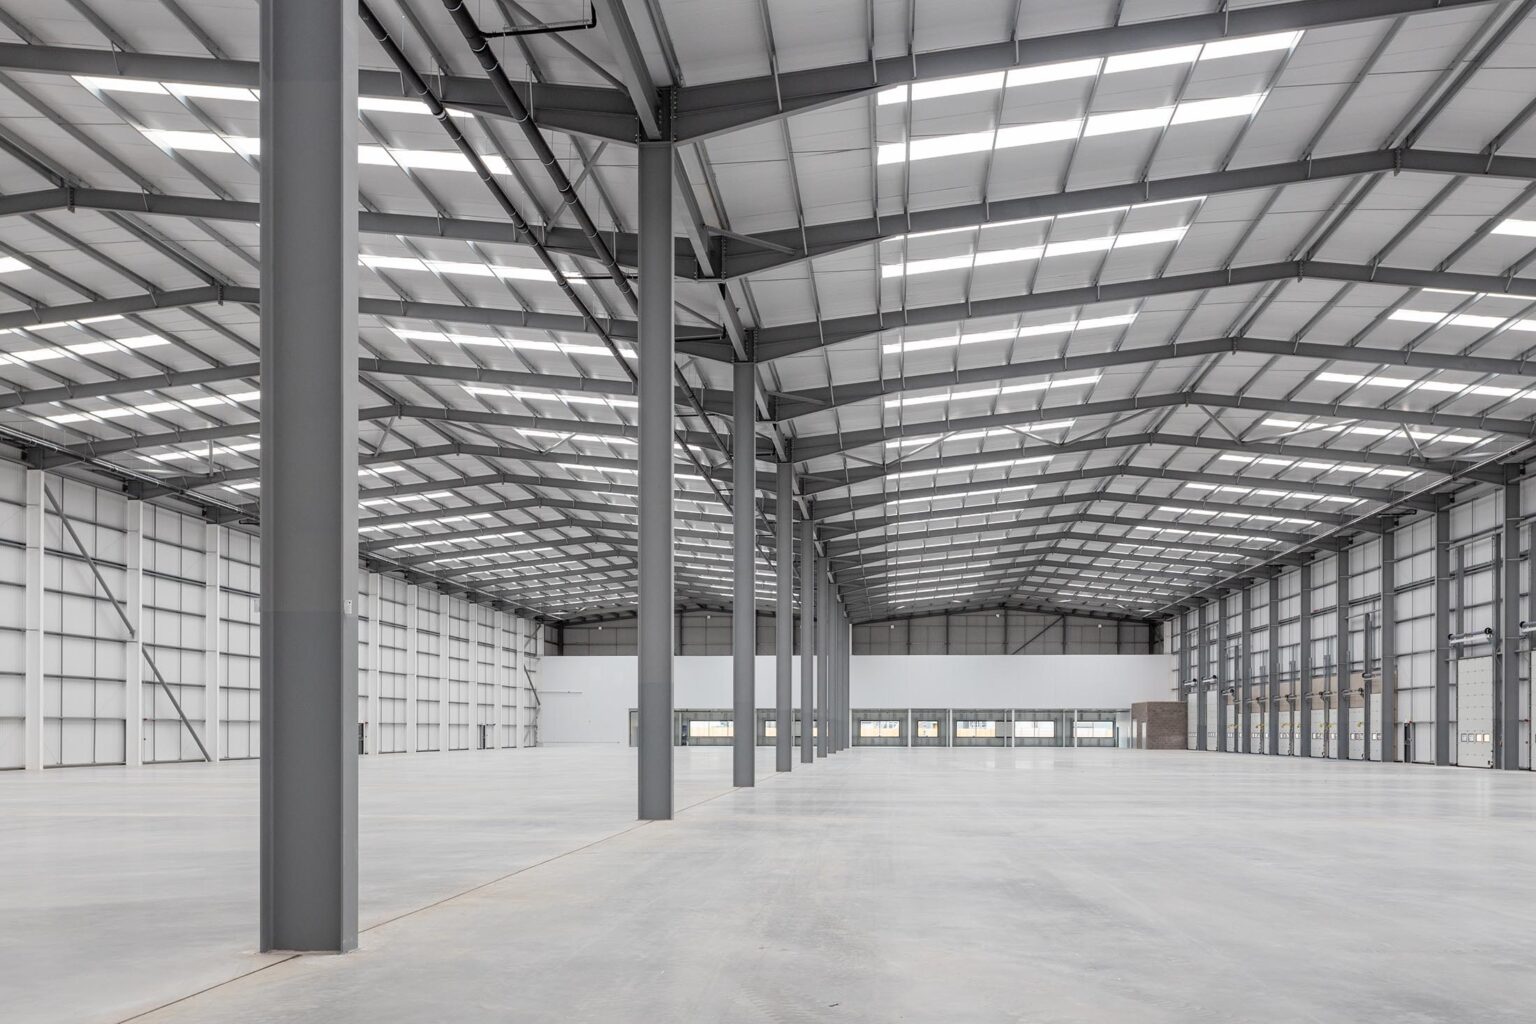 An interior of a large empty warehouse with overhead lights on